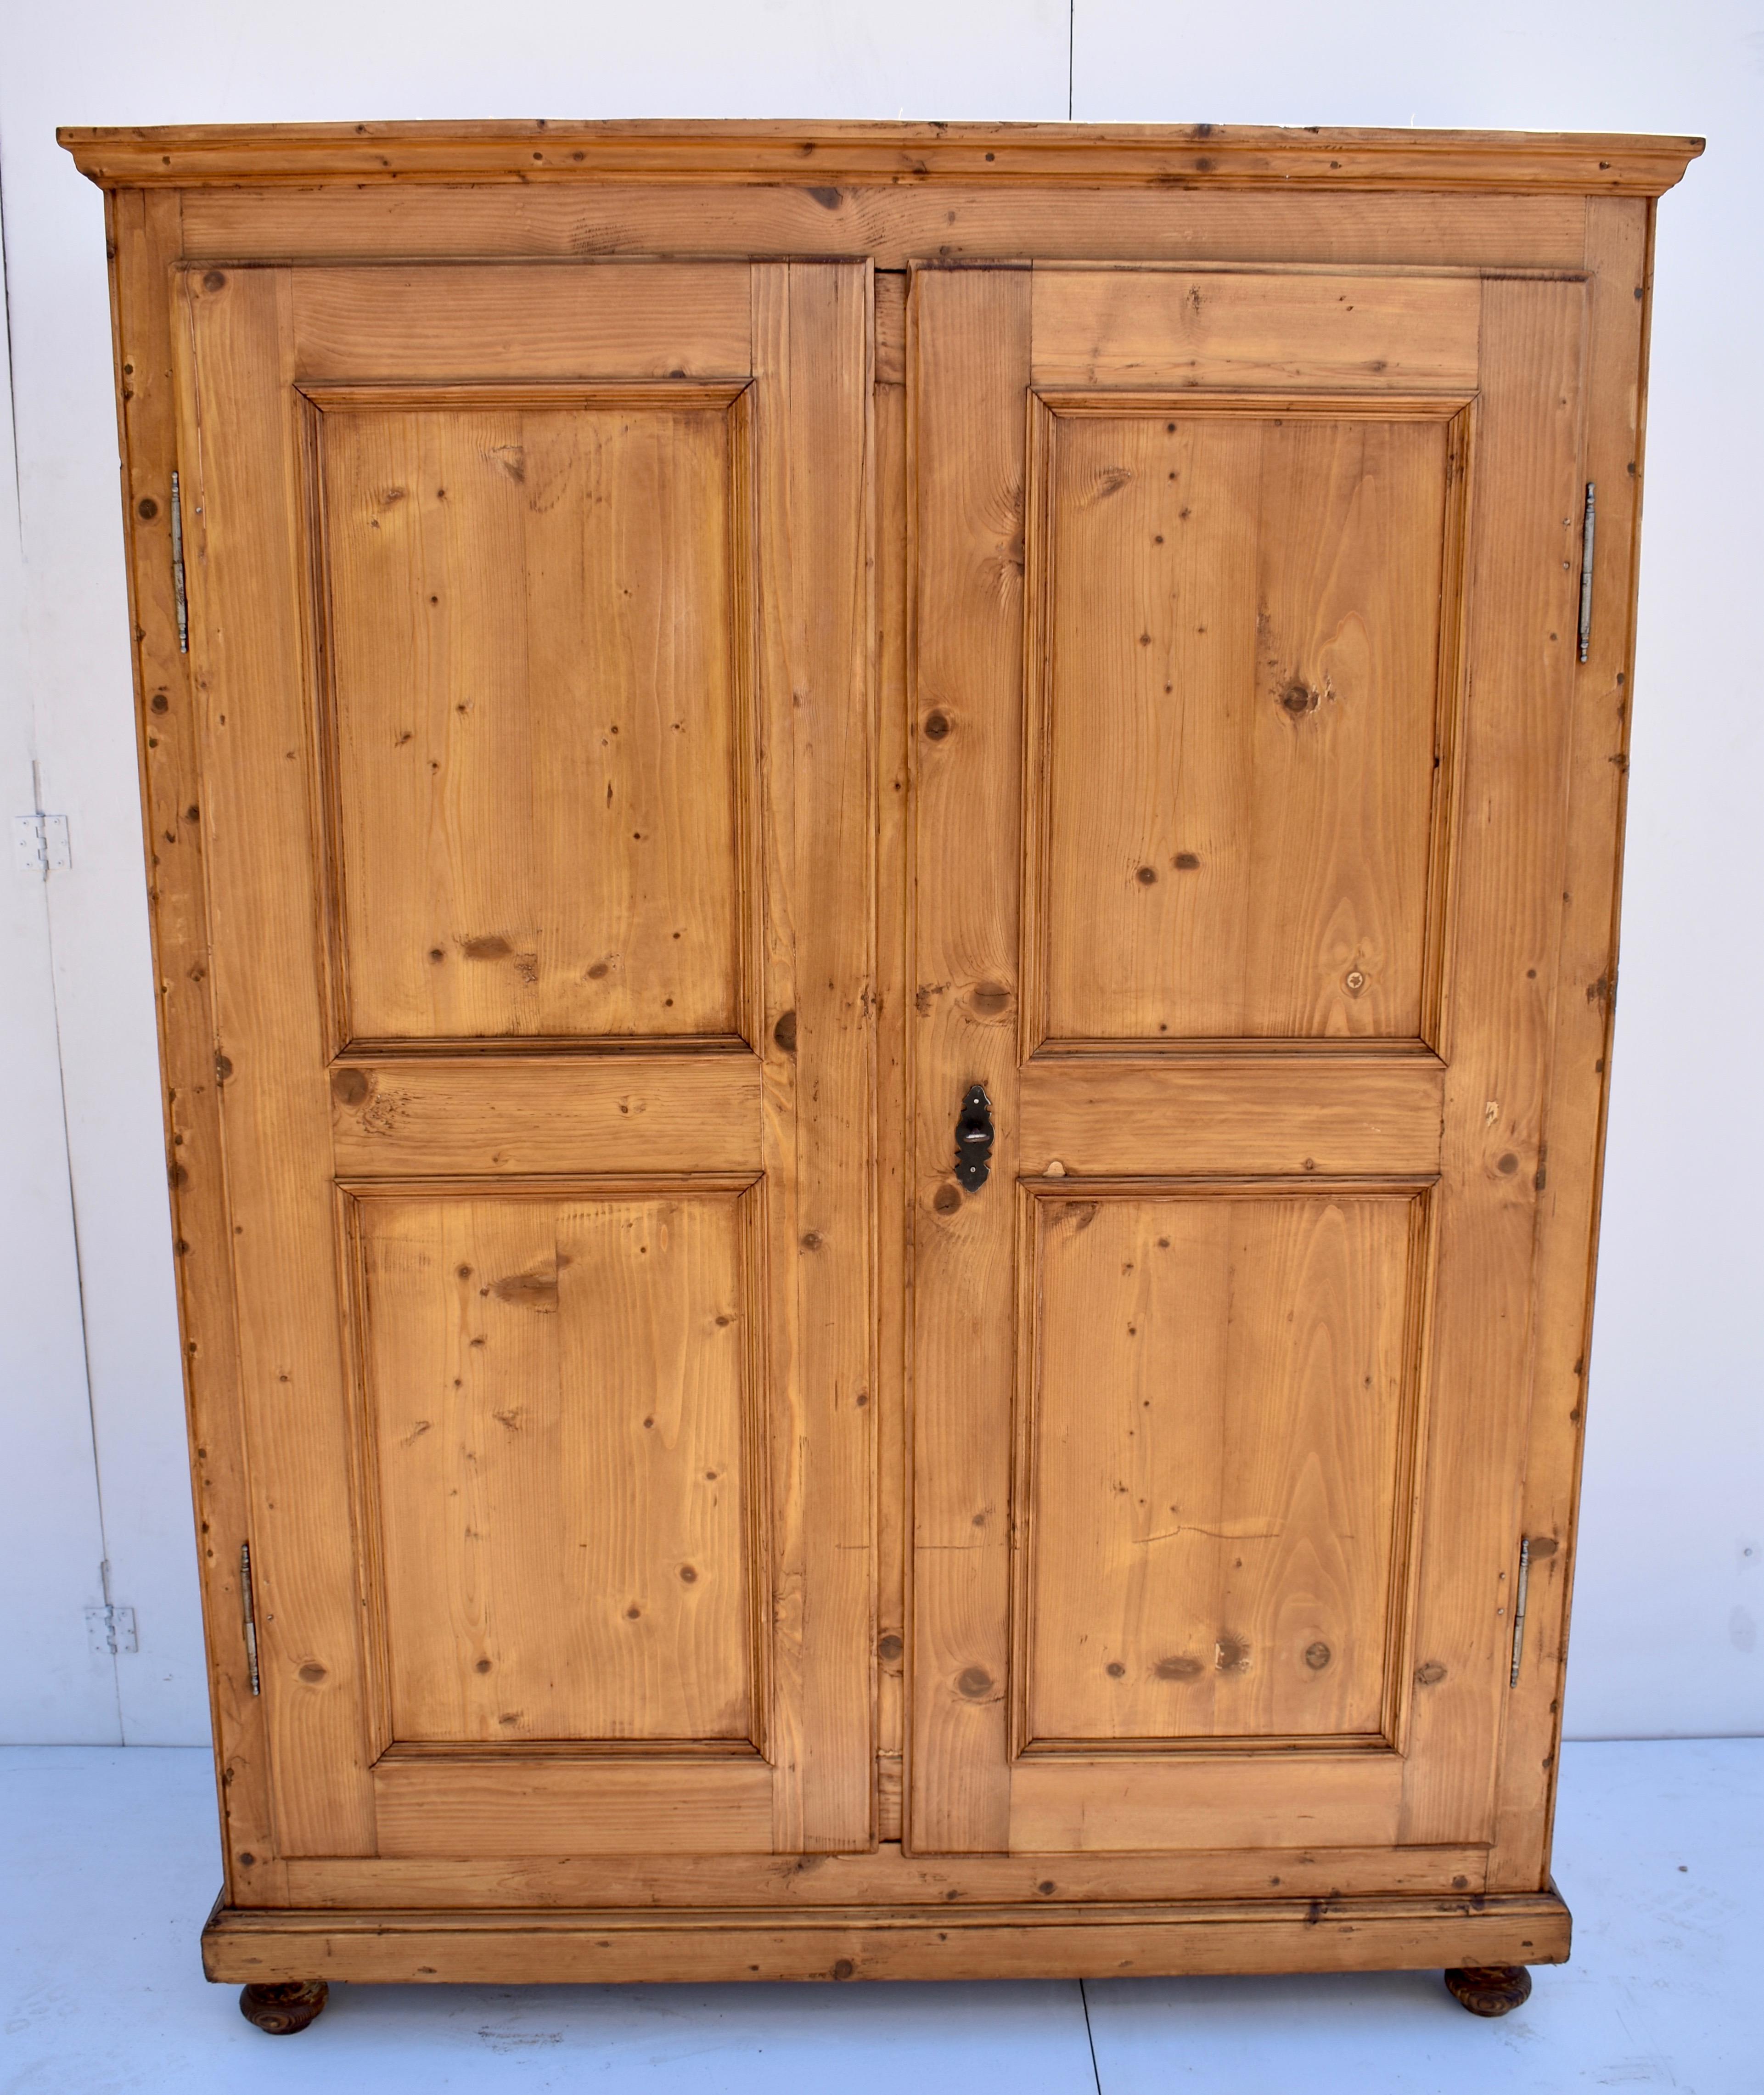 This large pine armoire has a bold ogee crown molding and plain fascia with two paneled doors. The doors have a thumbnail chamfer around the outside of the frame, the only decorative touch apart from a bead carved into the front corners of the case.